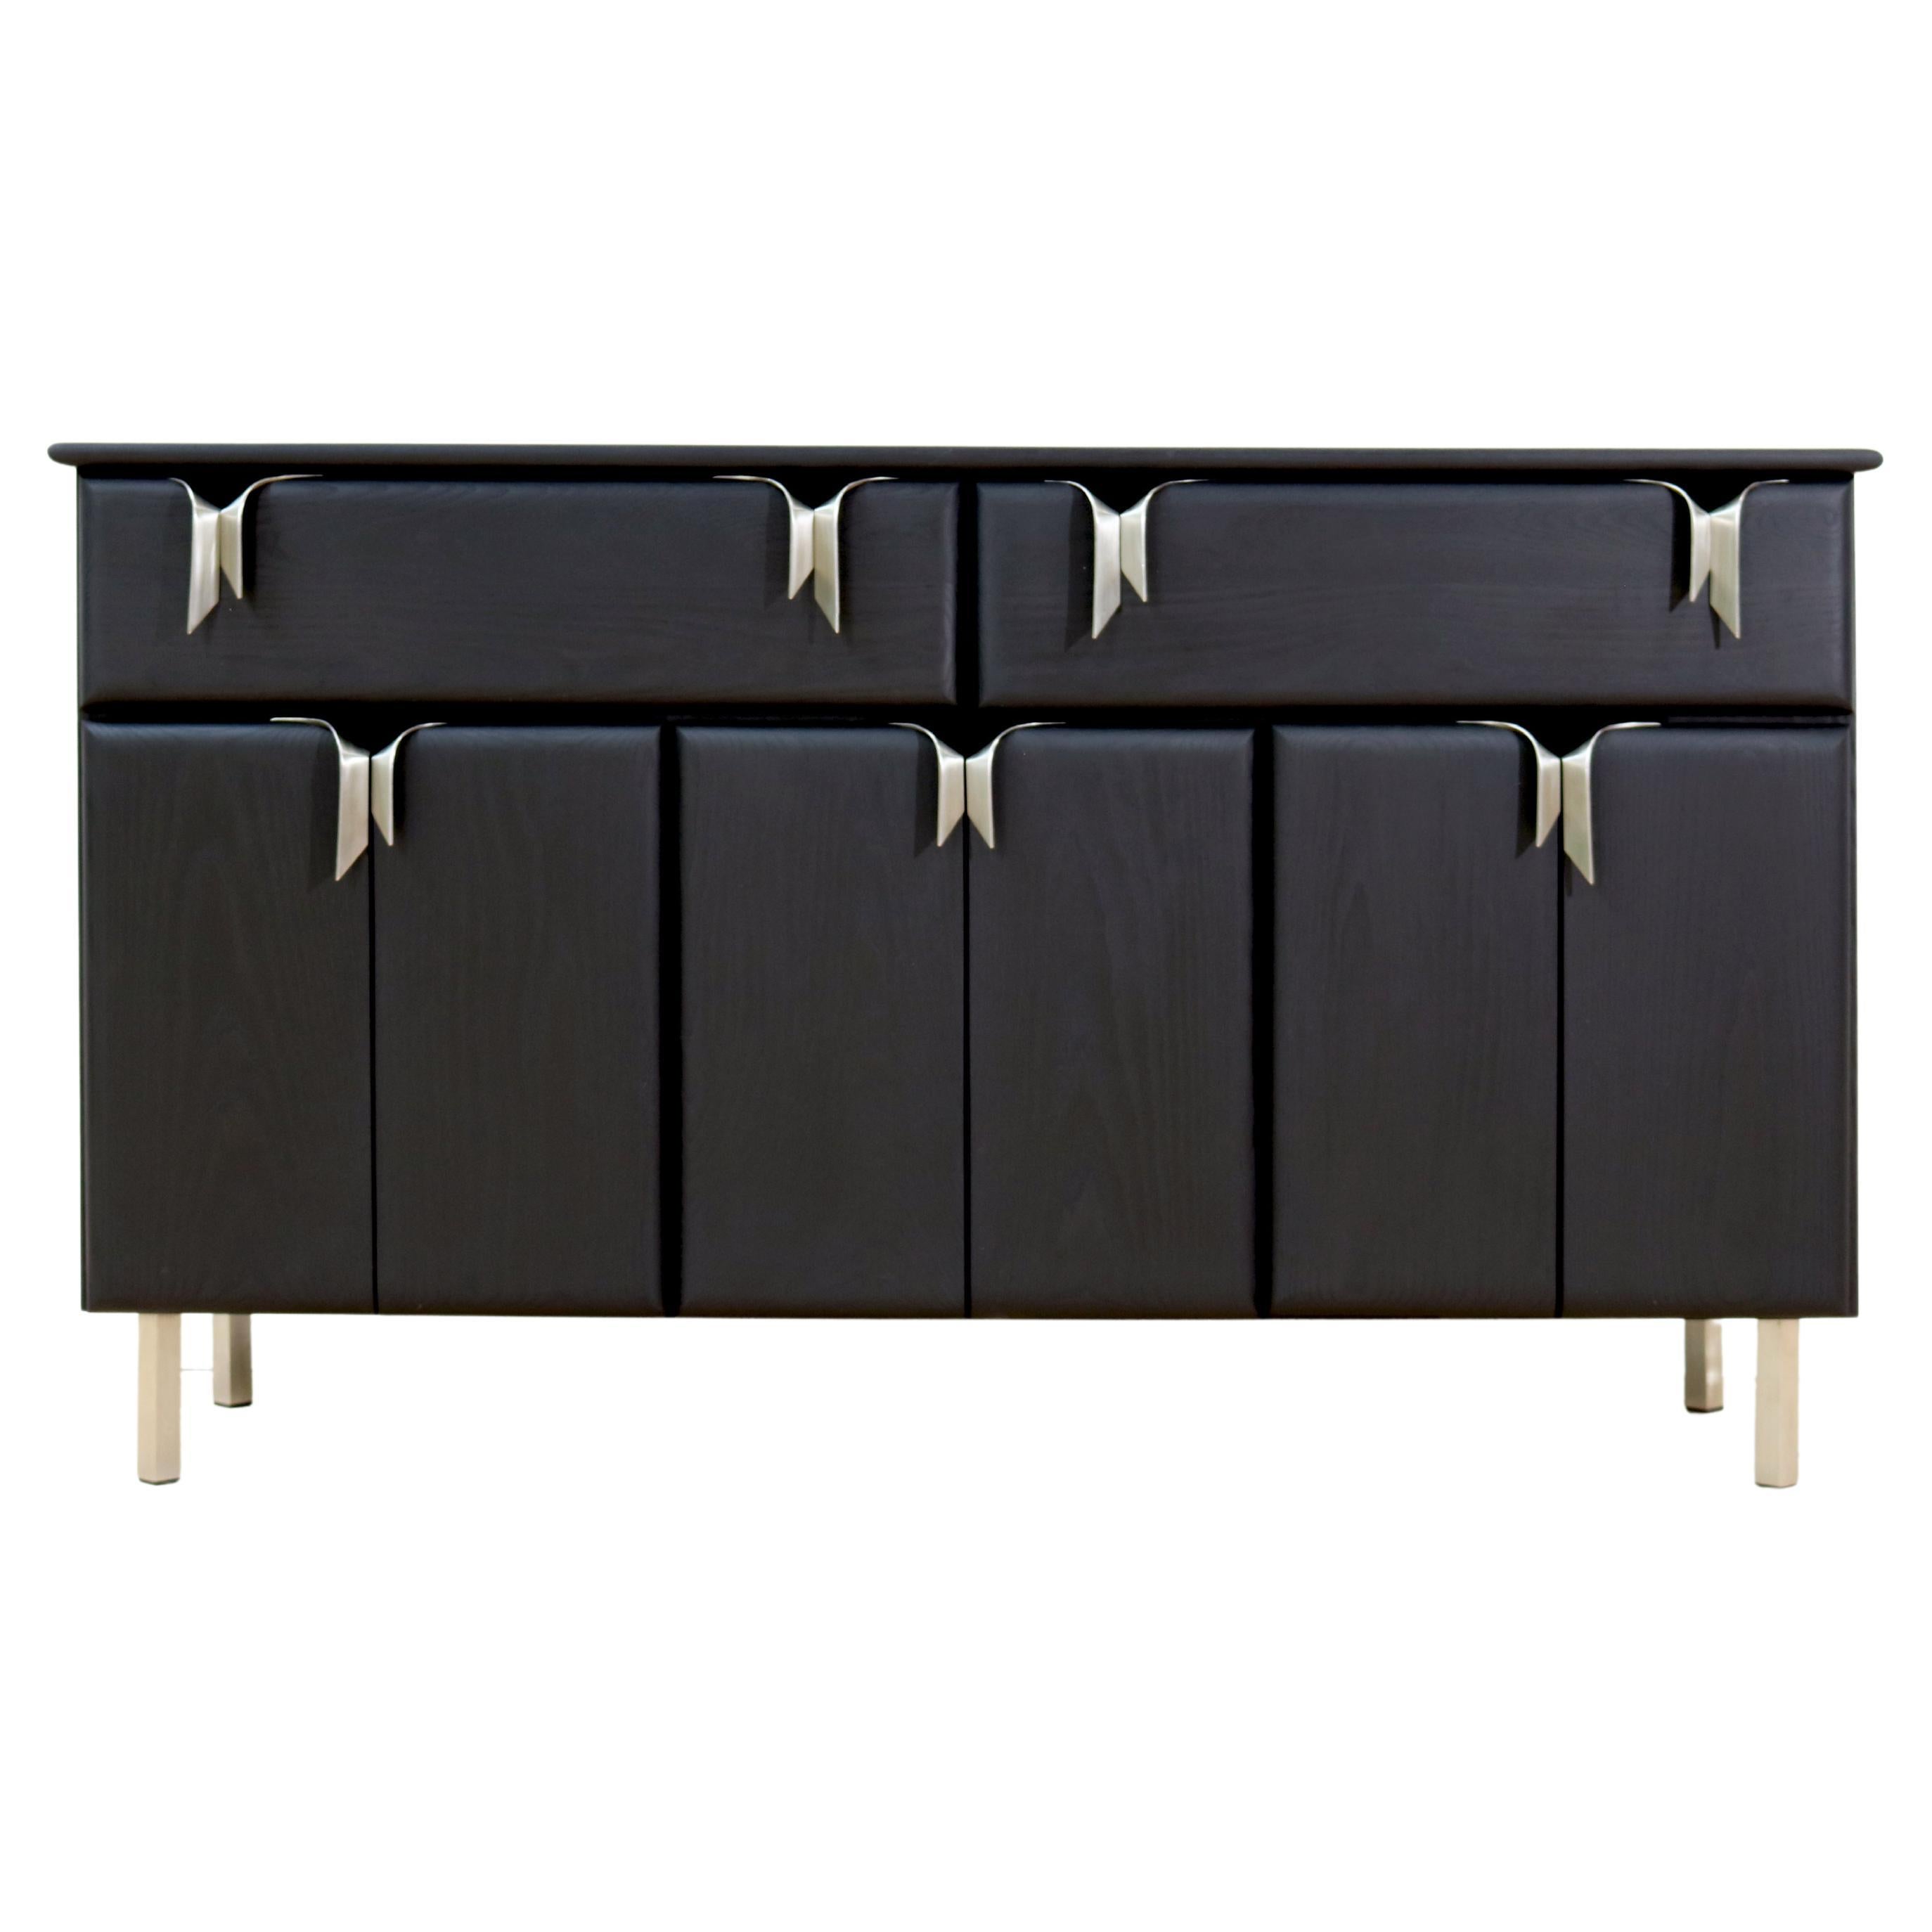 Ribbon Console - Black Ash Wood with Silver Hardware by Debra Folz For Sale